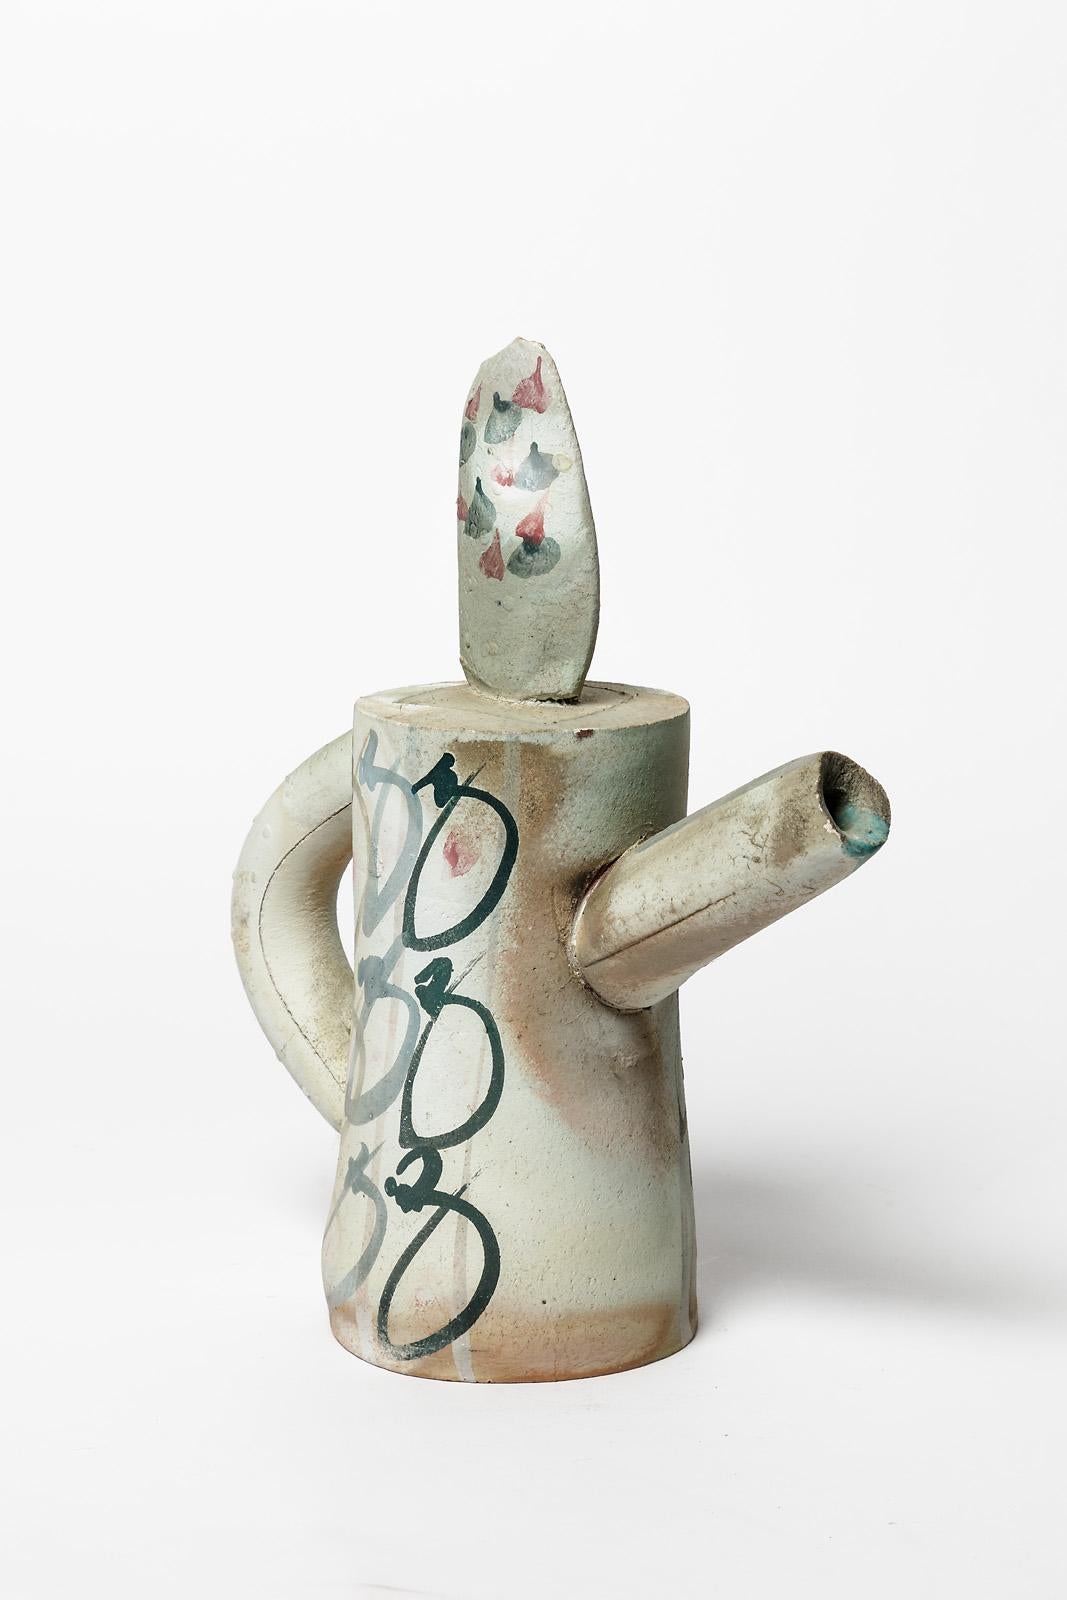 French Ceramic Tea Pot with Abstract Glaze Decoration by David Miller, circa 1990